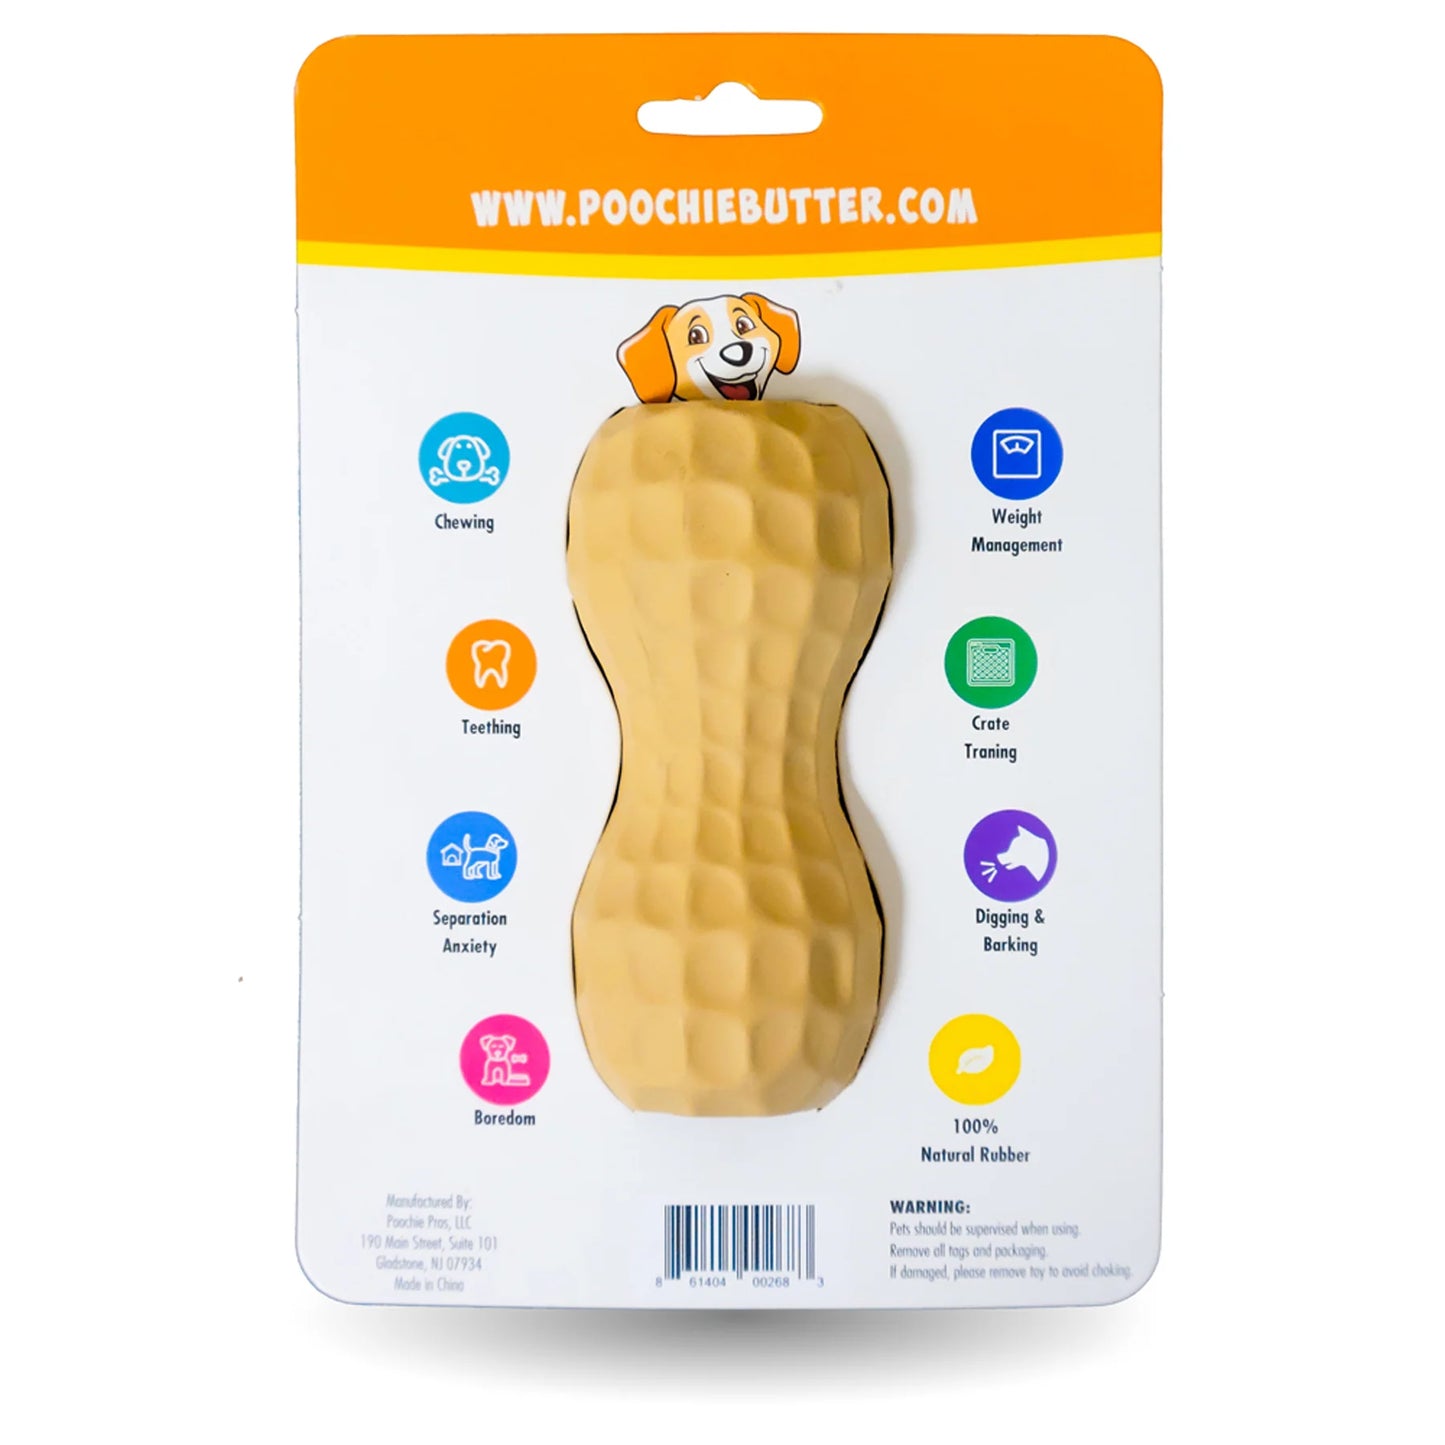 Back of tan peanut shaped chew toy filler for dogs in carboard packaging. Package shows benefits of toy including: chewing, teething, separation anxiety, boredom, weight management, crate training, digging & barking. There is a warning label that reads, "pets should be supervised when using. Remove all tags & packaging. If damaged, please remove toy to avoid choking". 